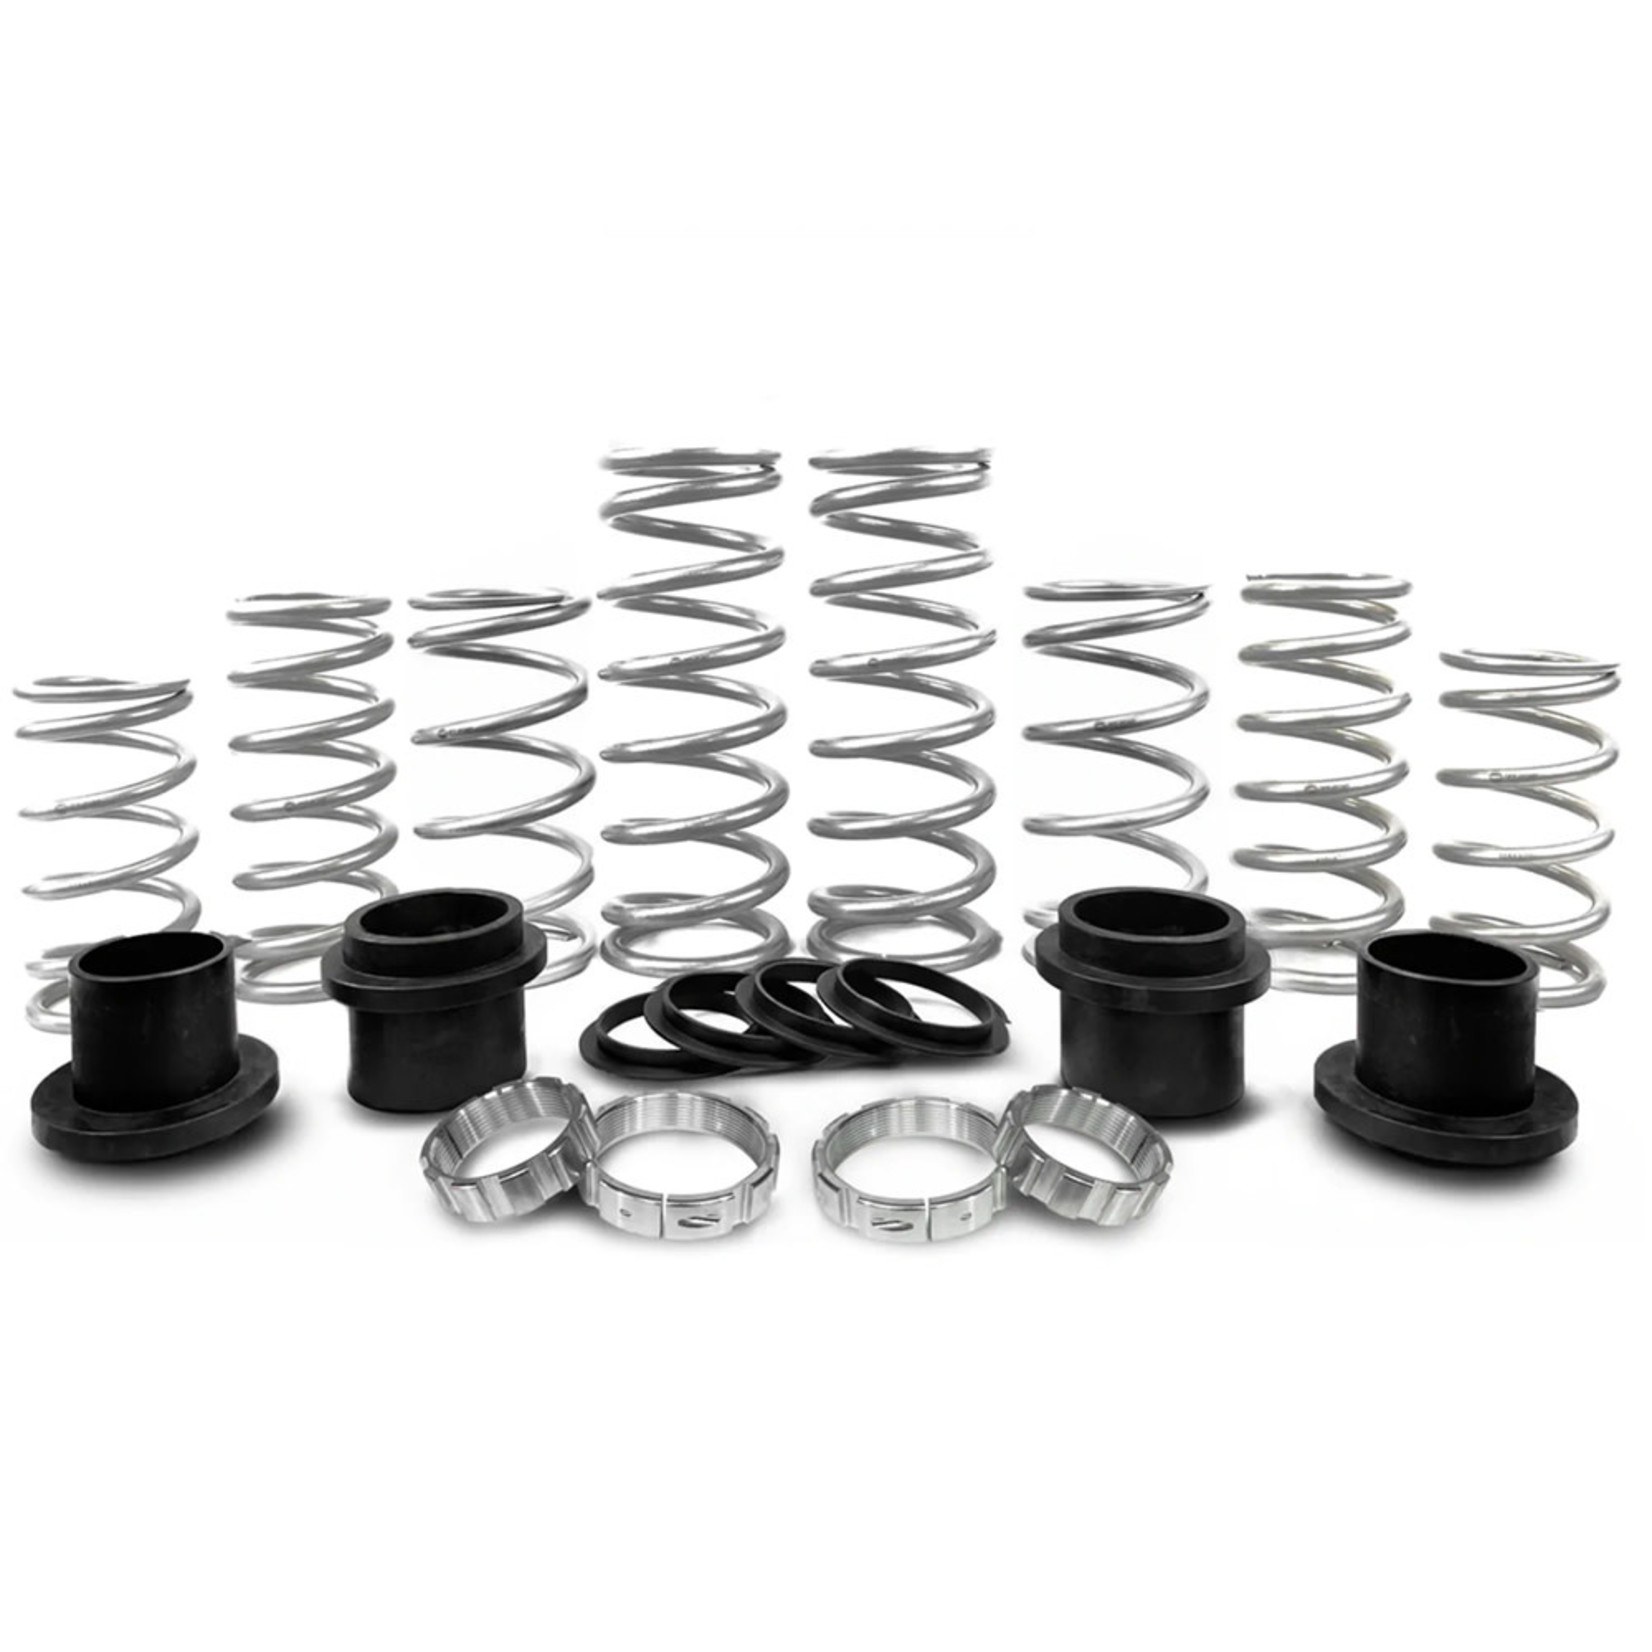 MTS Off-Road MTS Off-Road Spring Kit for Polaris RZR Pro R